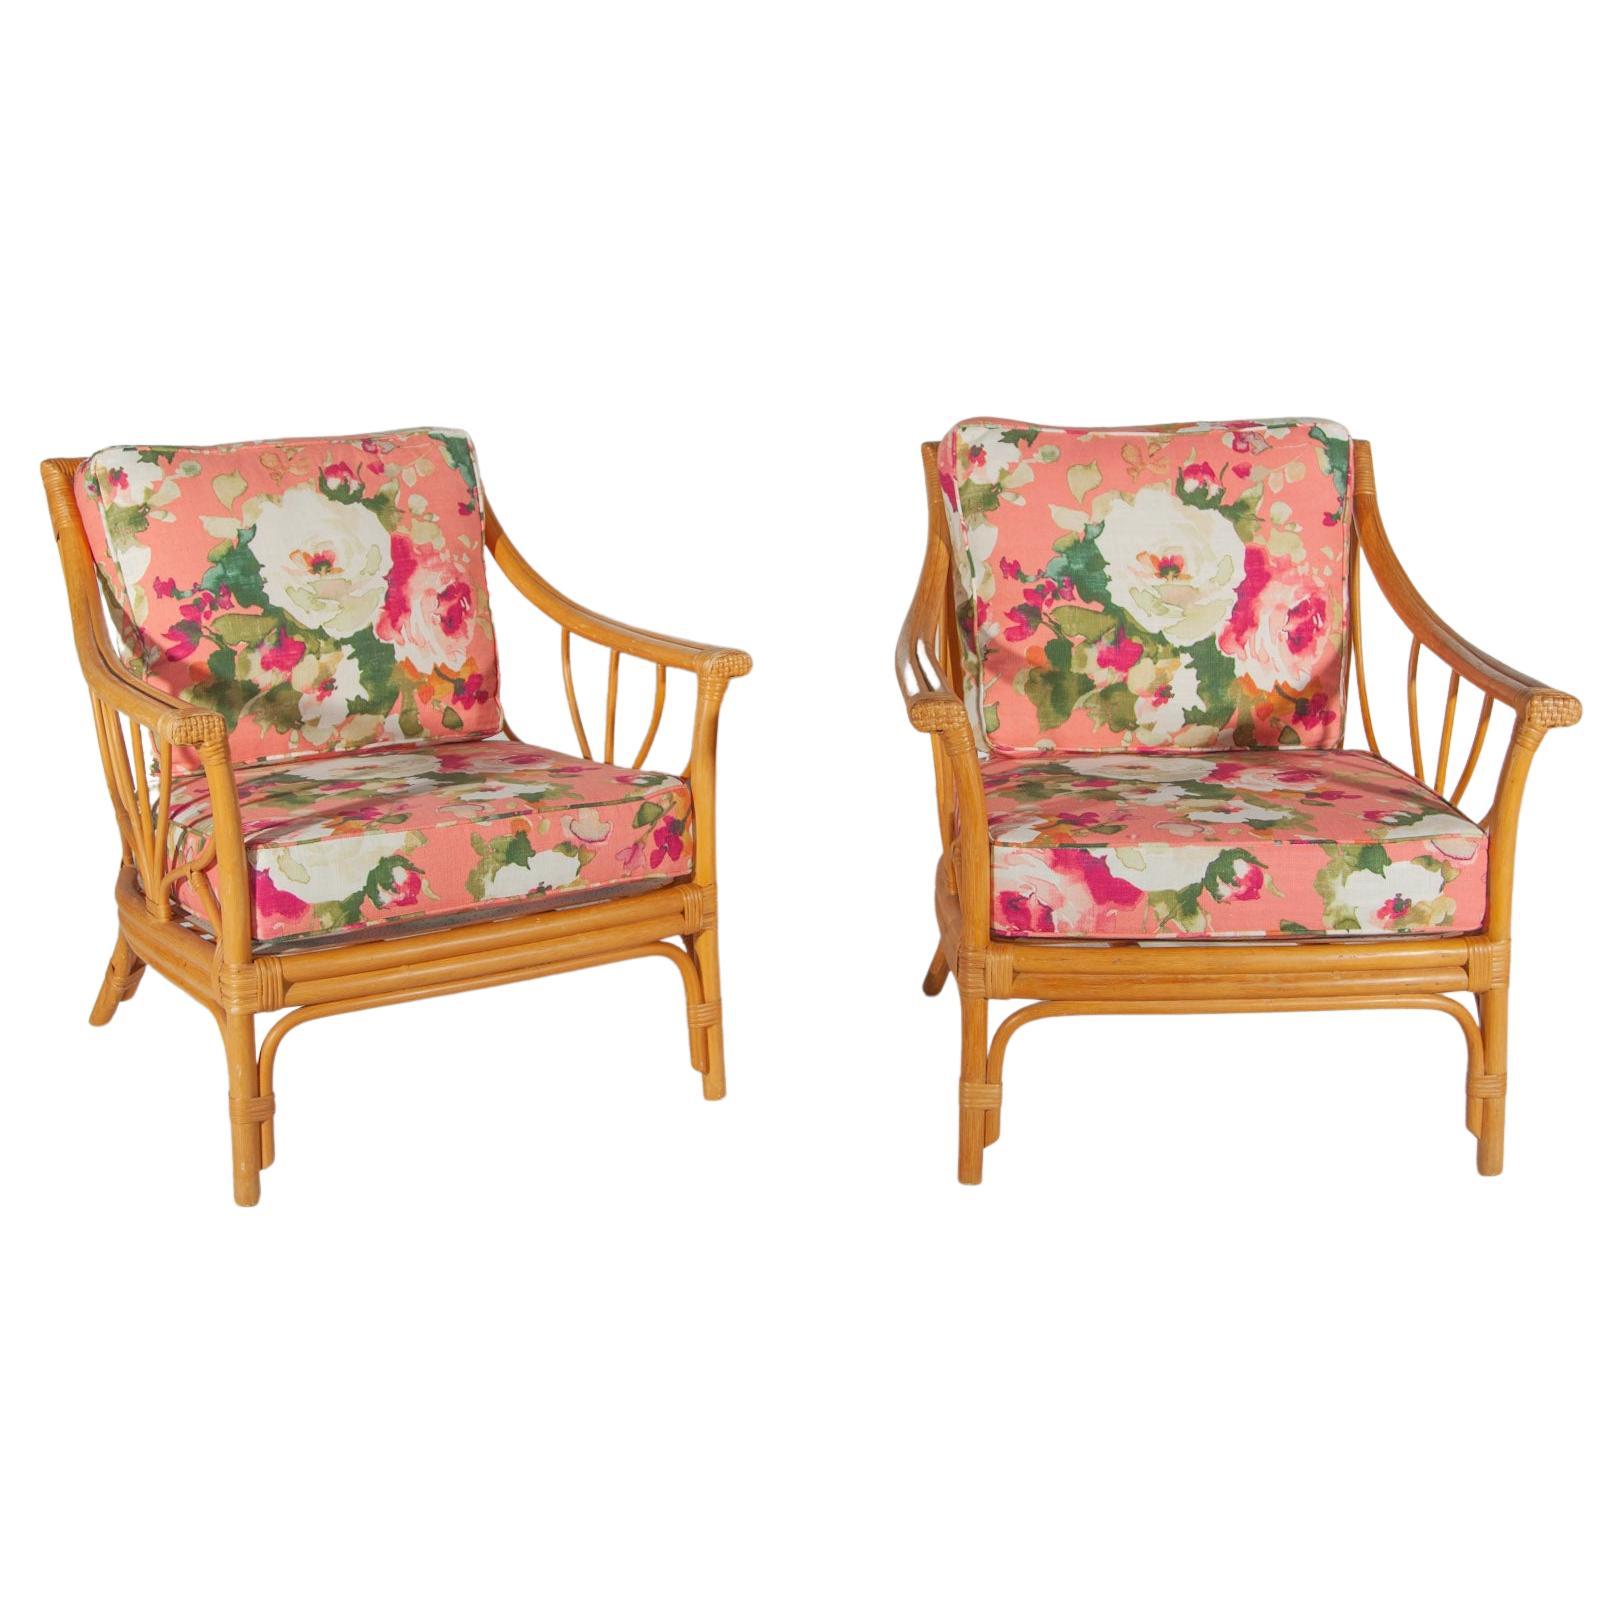 Set of two lounge chairs very stylish quality vintage bamboo designed in Italy 1960's. The lounge chairs has renewed upholstered cushions in a soft color floral outdoor fabric. 
The set can be used well on your patio or in your living room annex sun